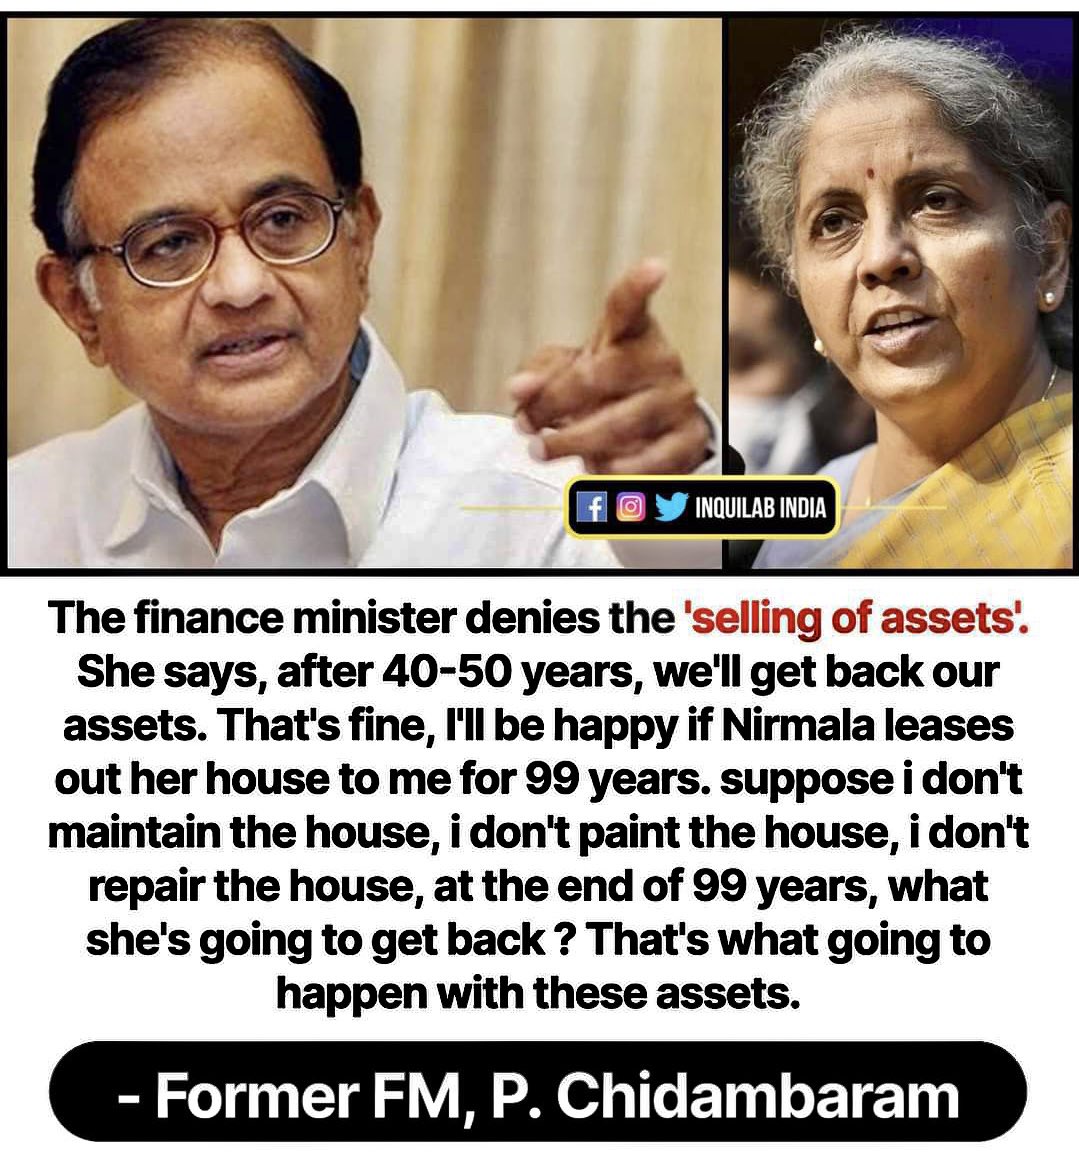 When @PChidambaram_IN gives @nsitharamanoffc and @NITIAayog a tutorial on their wanton folly, the #NationalMonetisationPipeline BUT the arrogance of their master, will compel them to huff and puff up some more disingenuous excuses. Sadly a spineless bunch & not savvy either 🤦🏽‍♀️